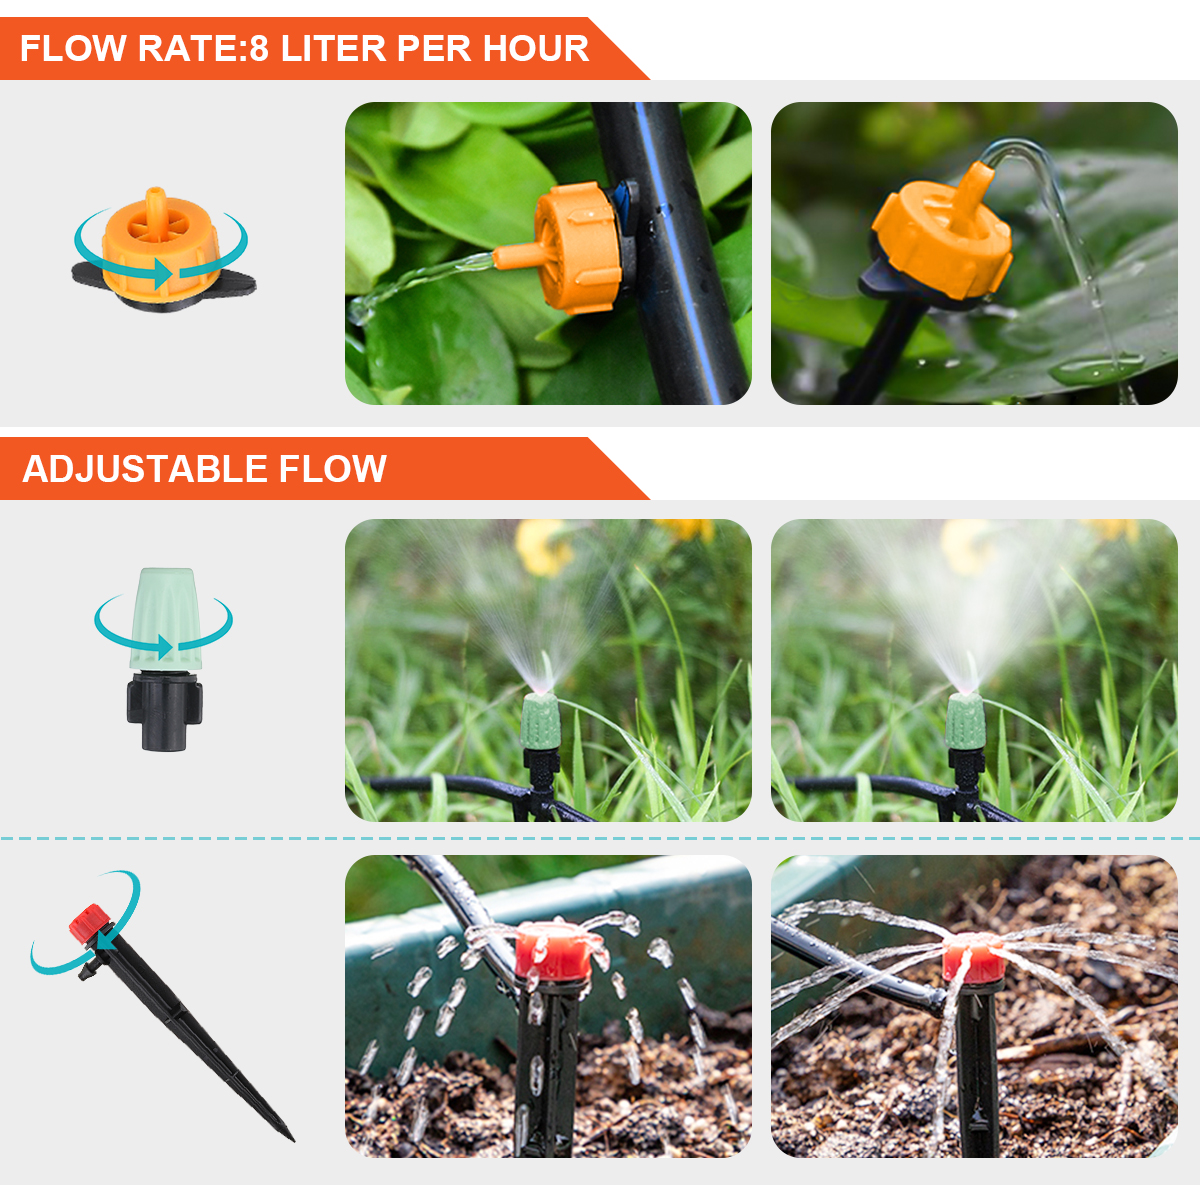 CAVEEN-131Ft40M-Automatic-Drip-Irrigation-DIY-Garden-Plant-Watering-Kit-Micro-Drip-Irrigation-System-1897661-3